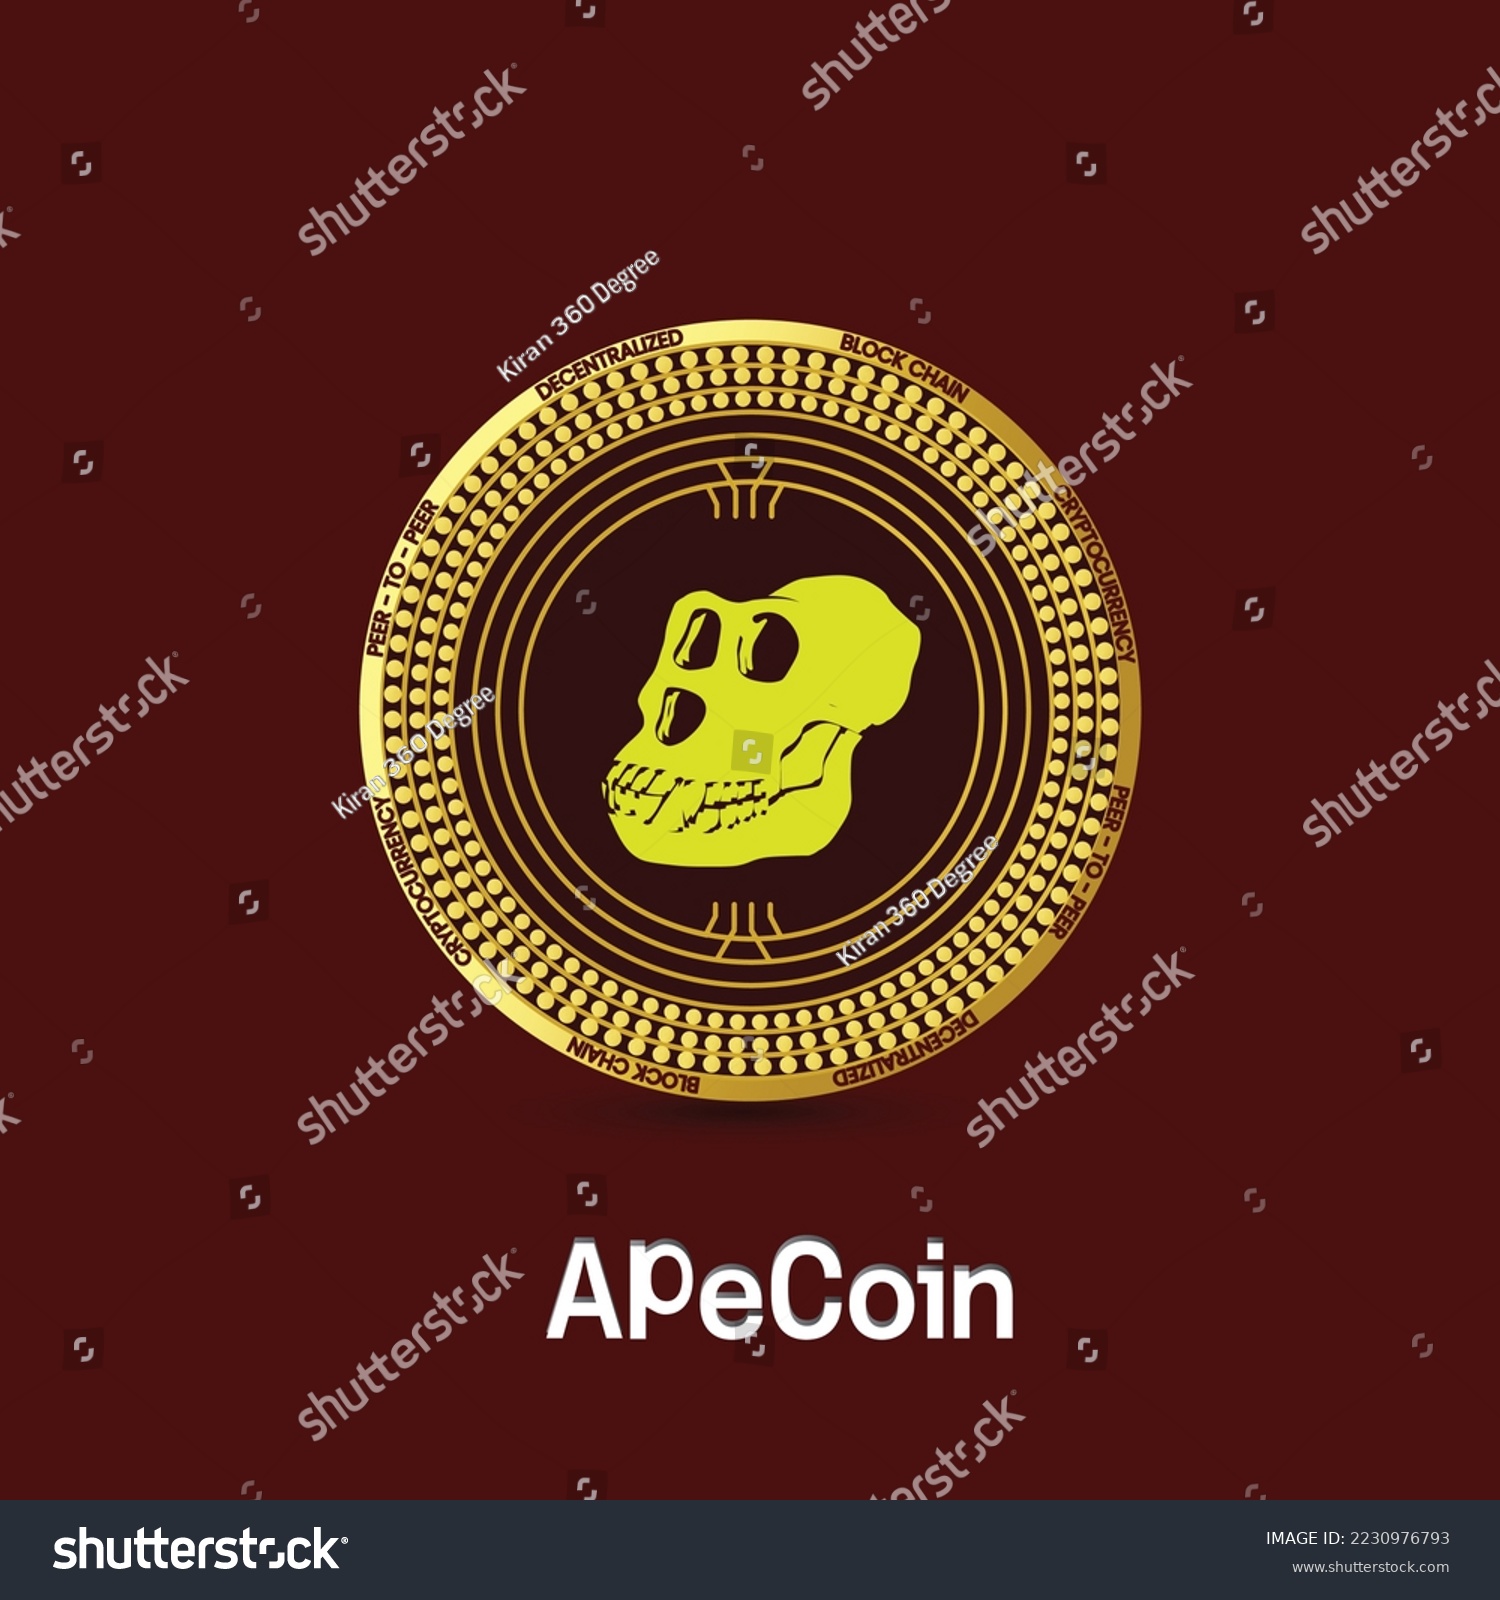 SVG of Apecoin APE Cryptocurrency coin isolated on dark red background, Blockchain, finance symbol. Vector illustration, Crypto logotype symbol vector illustration of digital currency brand. svg